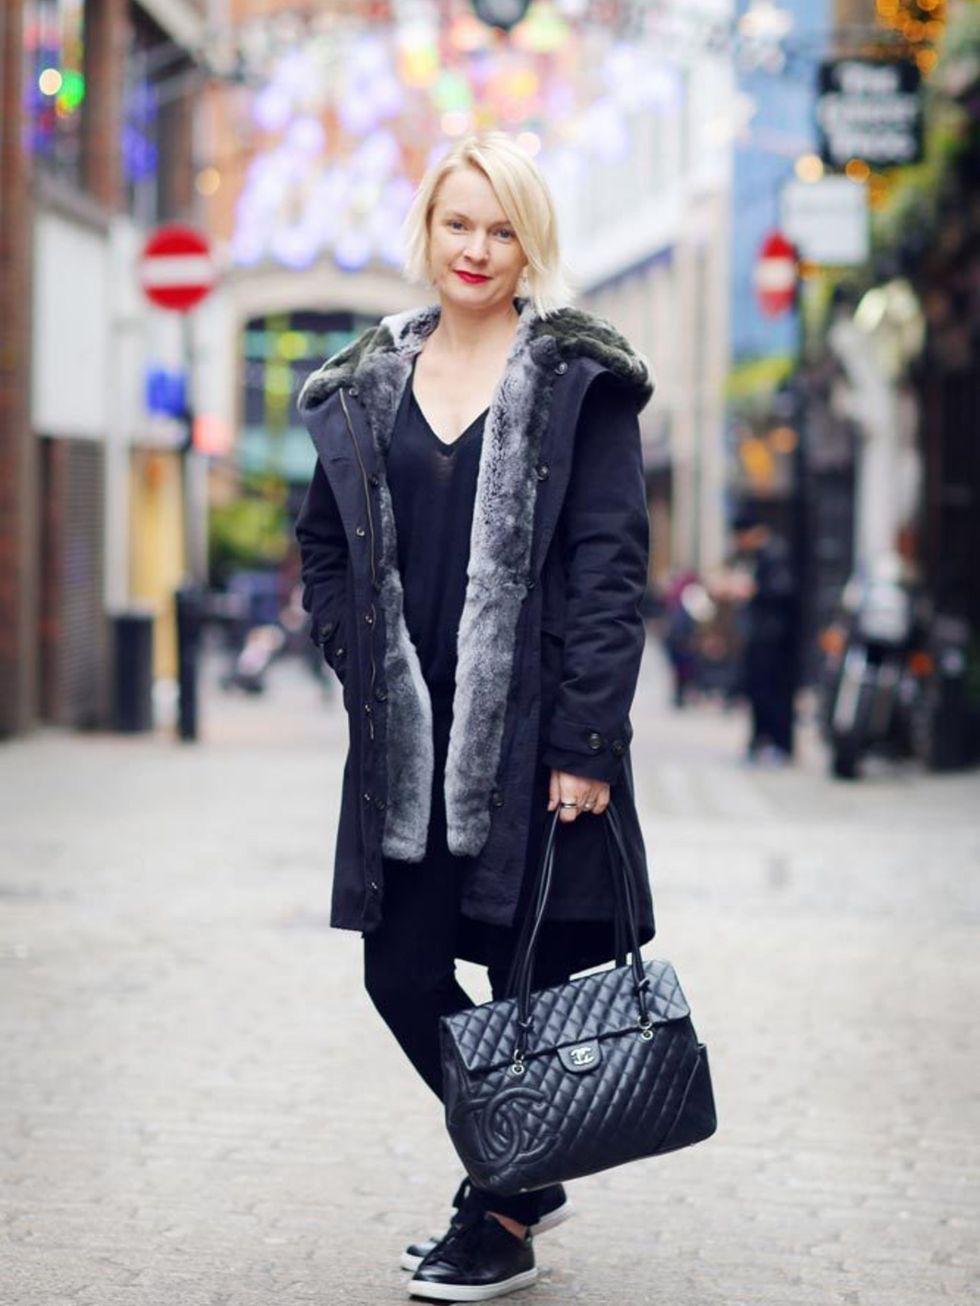 <p>Lorraine Candy, Editor-in-Chief </p>

<p>Woolrich Parka, Joseph cashmere top and trousers, Whistles trainers, Chanel handbag</p>